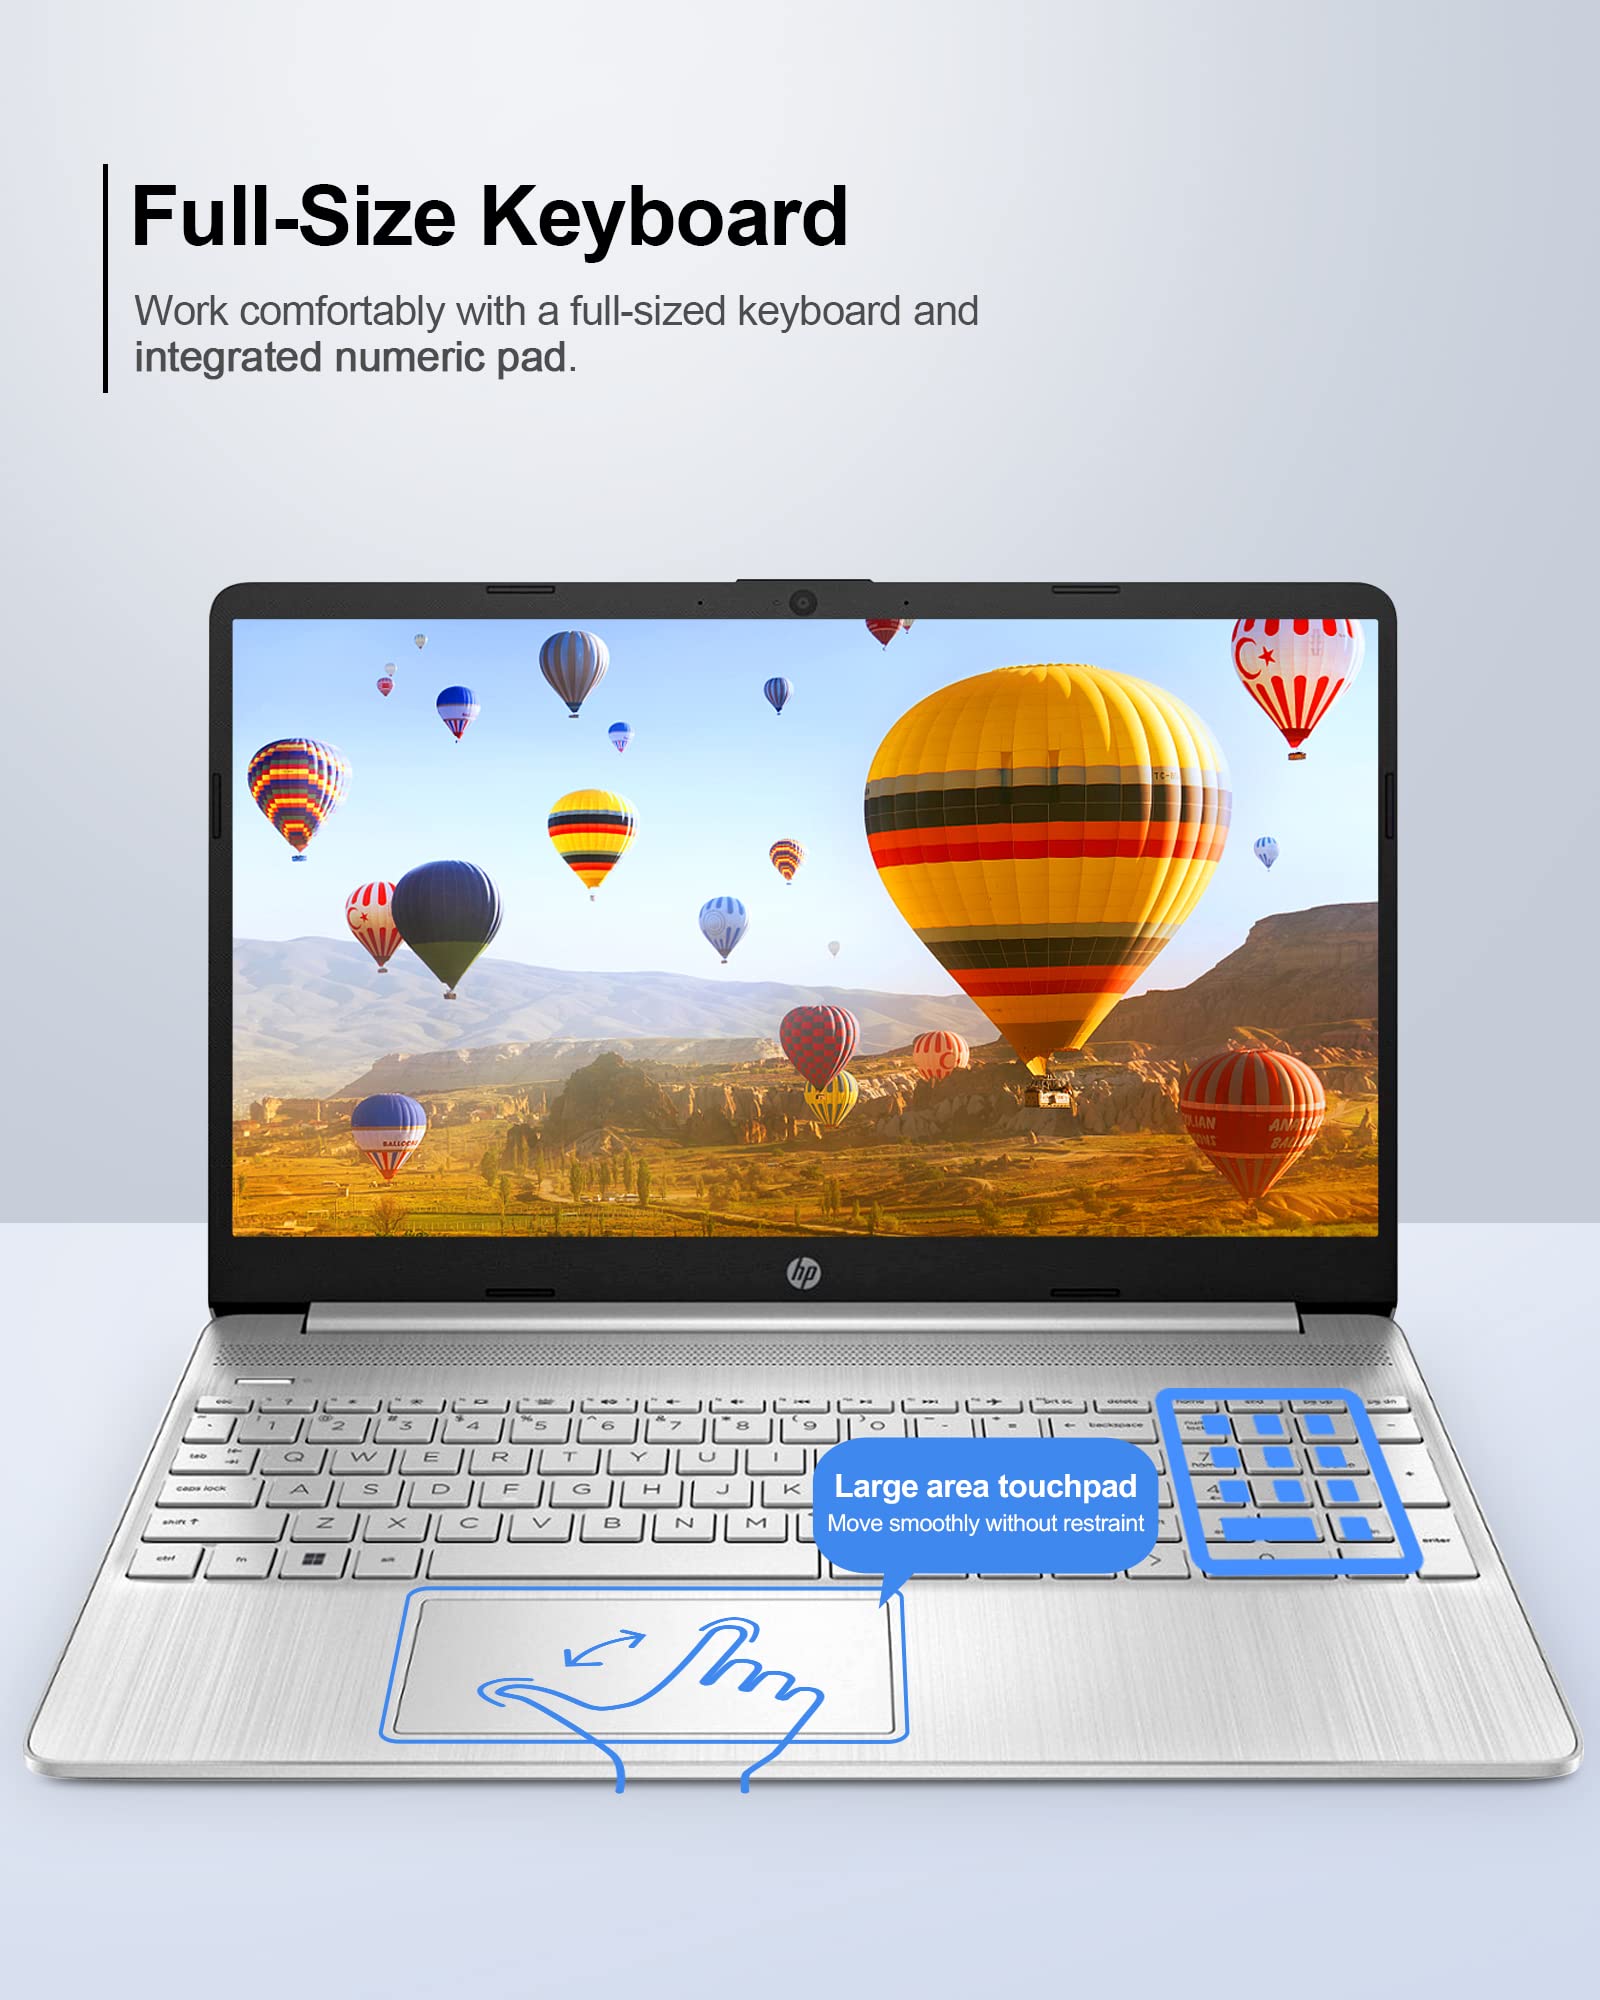 HP 2023 Newest 15.6" Touchscreen Laptop, Intel Core i3-1115G4 Processor Up to 4.1GHz, 16GB RAM, 1T SSD, Intel Iris Xe Graphics, Thin & Portable, 11 H Battery Life, Anti-Glare, Windows 11 Home S